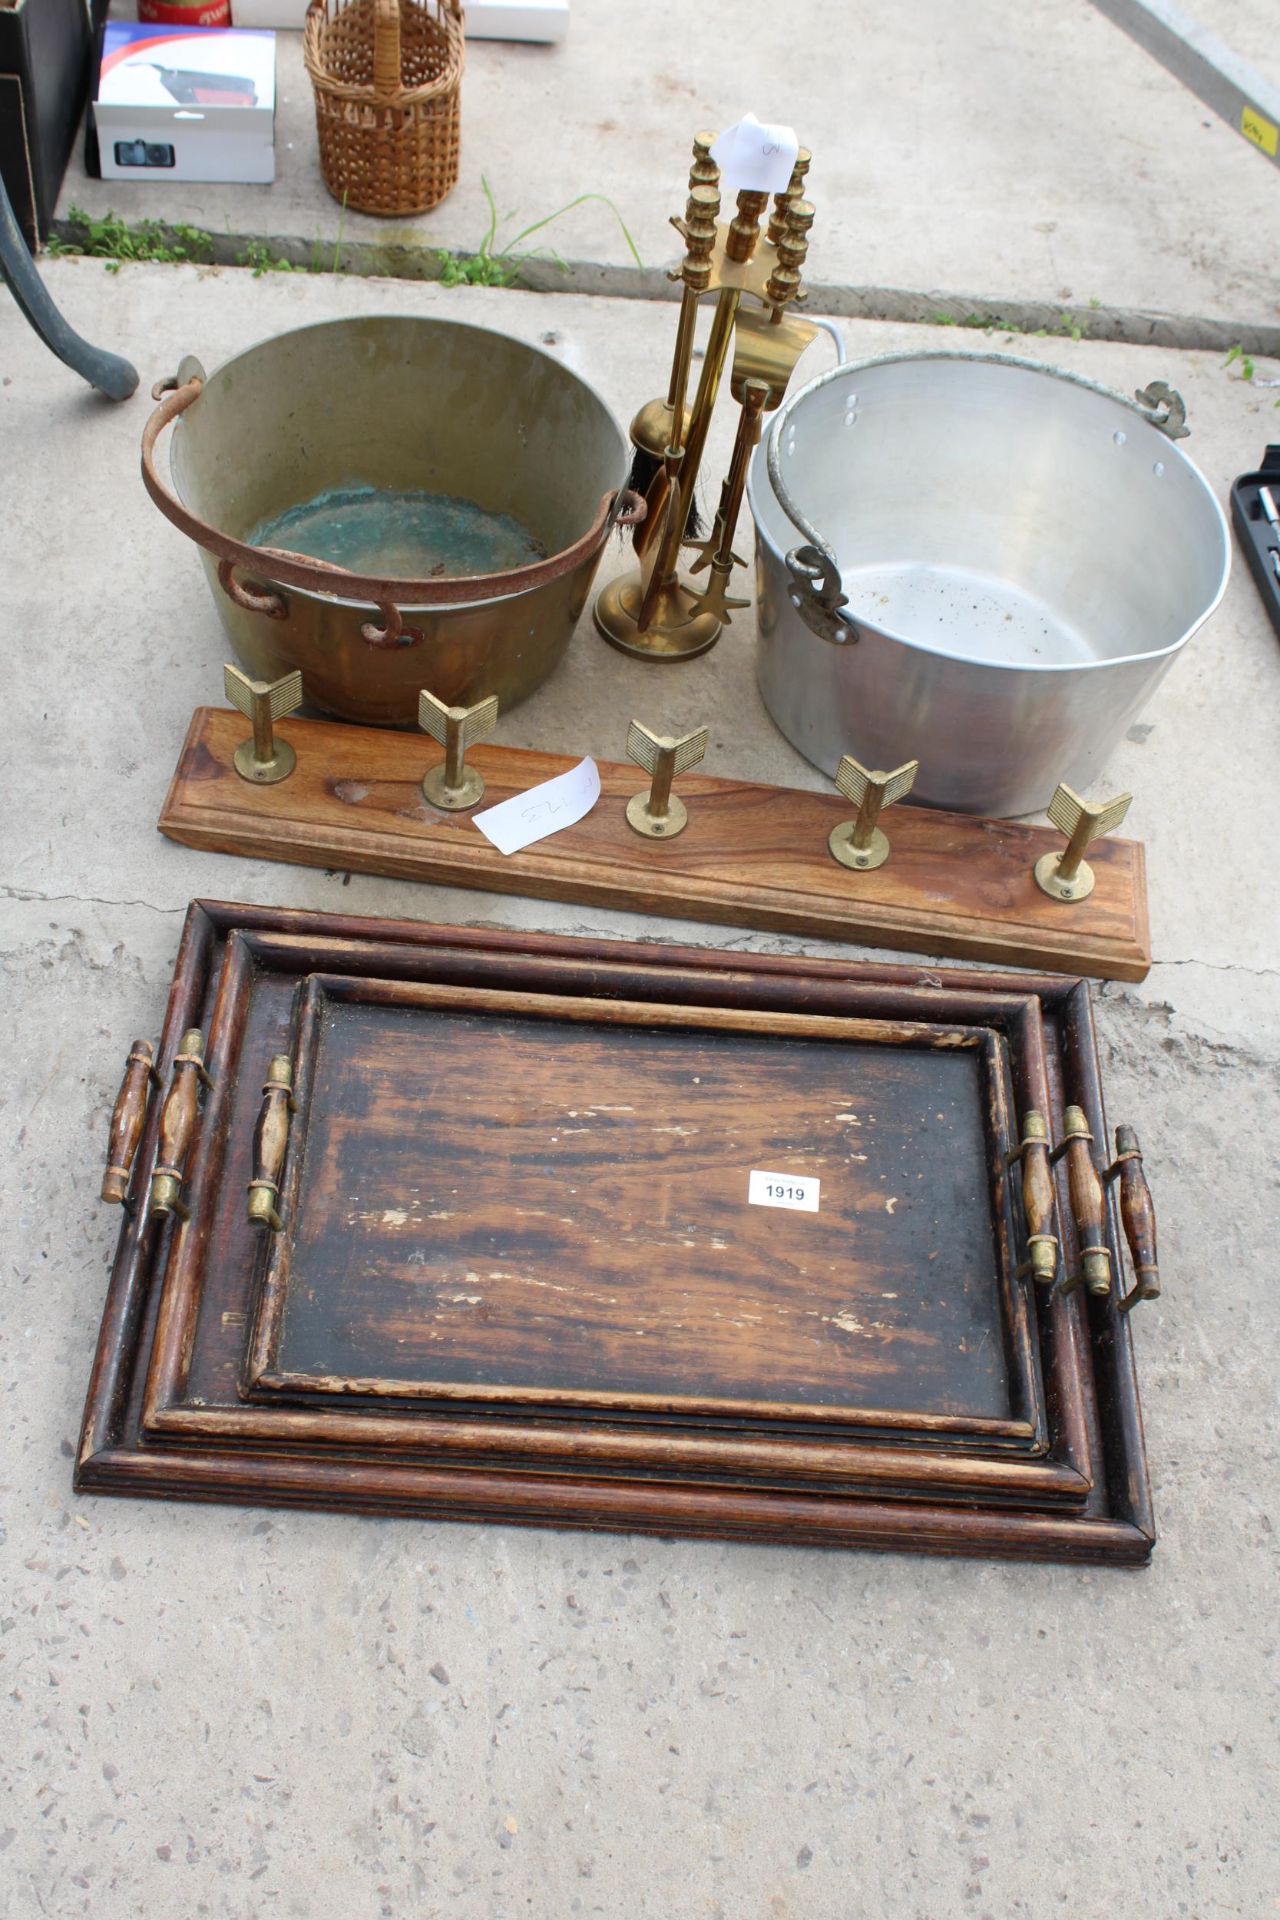 AN ASSORTMENT OF VINTAGE ITEMS TO INCLUDE THREE GRADUATEDWOODEN TRAYS, A BRASS JAM PAN AND A BRASS